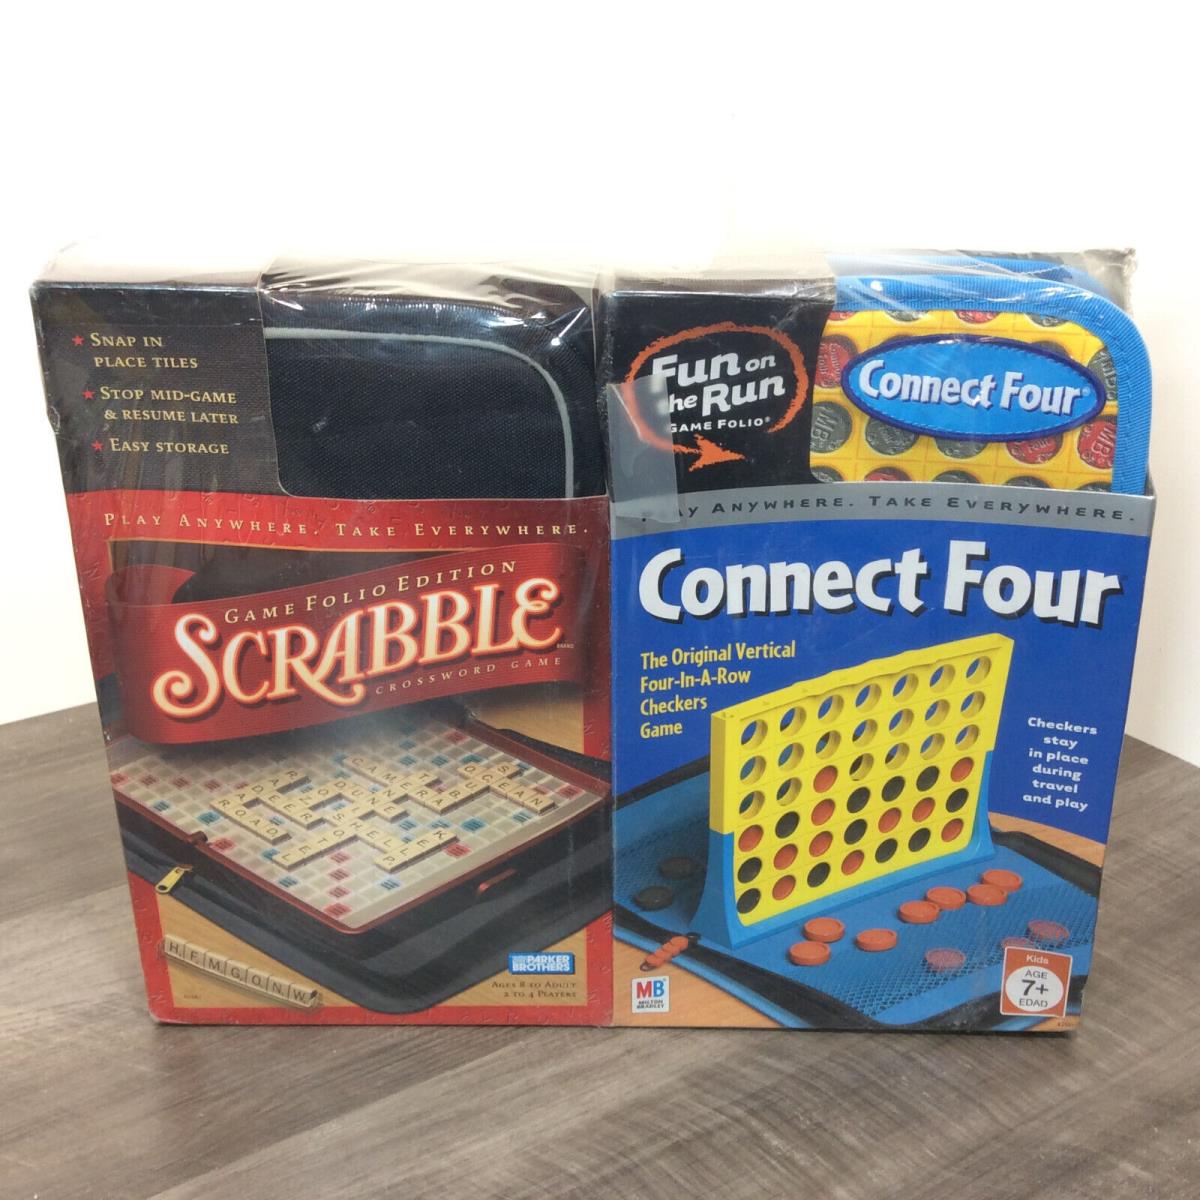 2 Travel Games Scrabble + Connect Four - Both Games Folio Editions